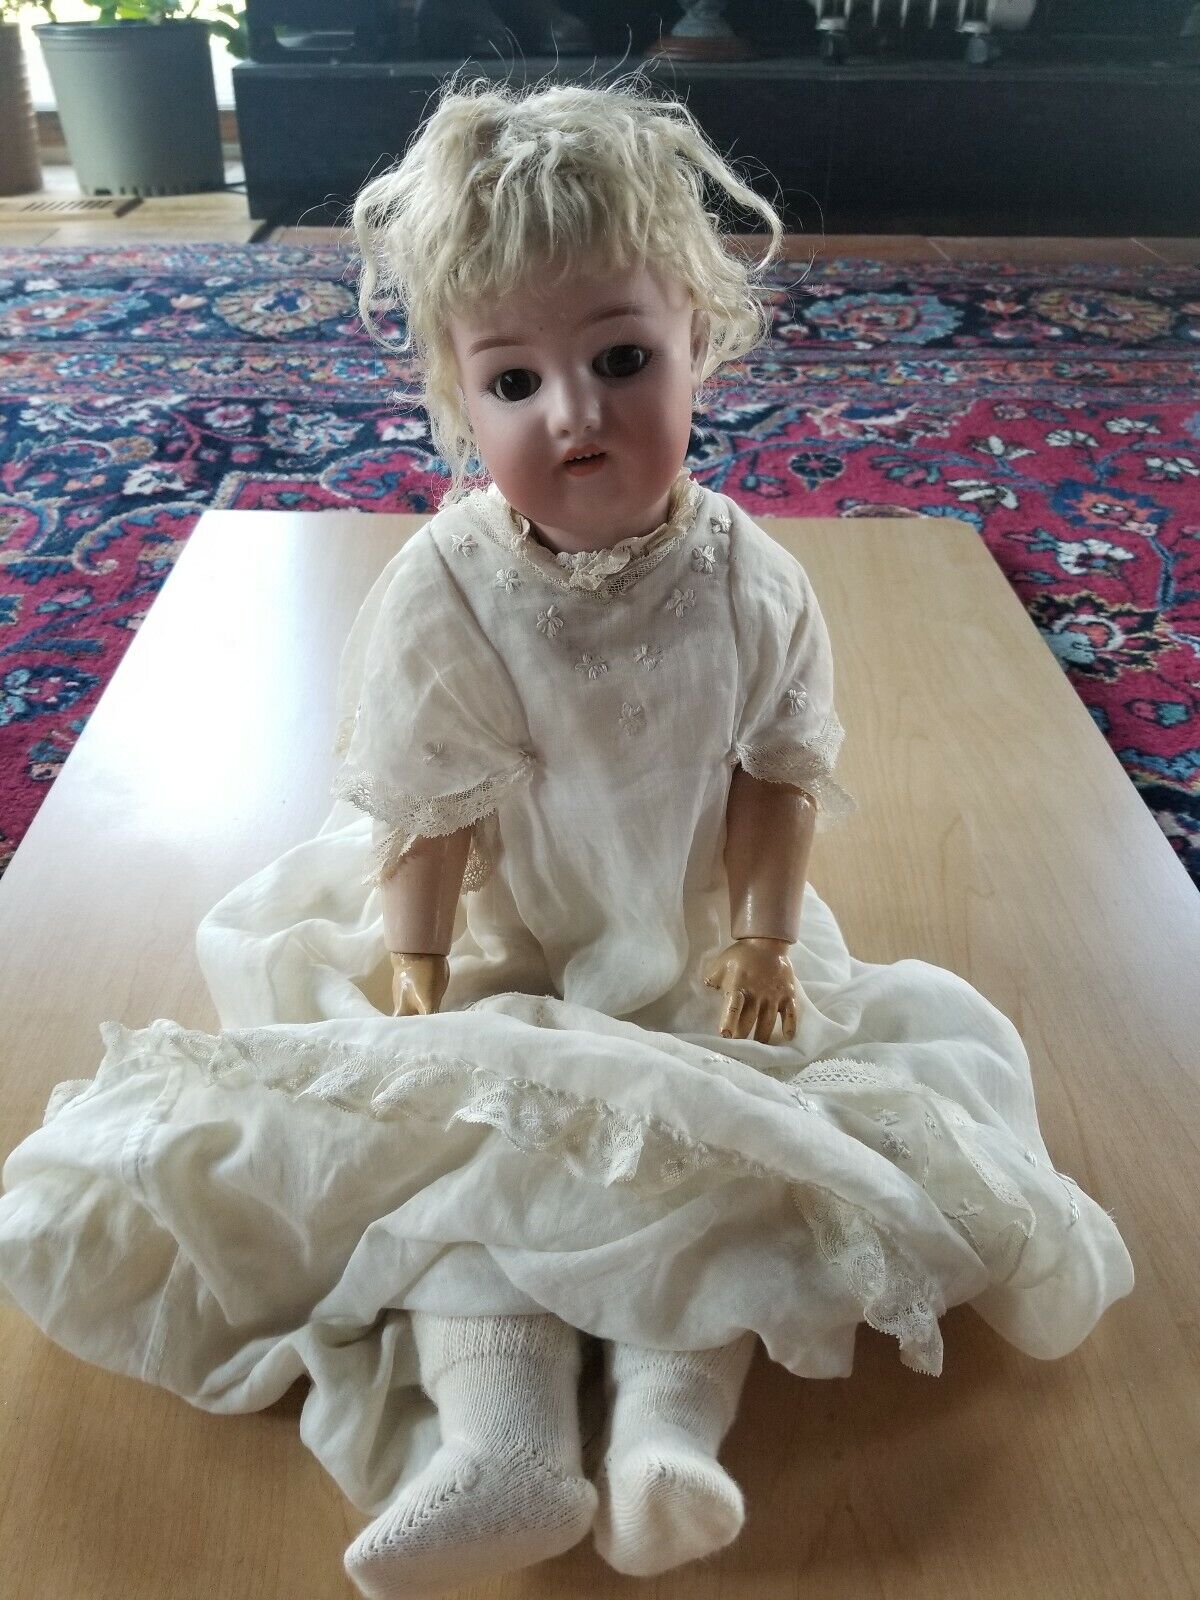 1870-1925 Simon & Halbig 21" German Bisque Doll from Collection with provenance